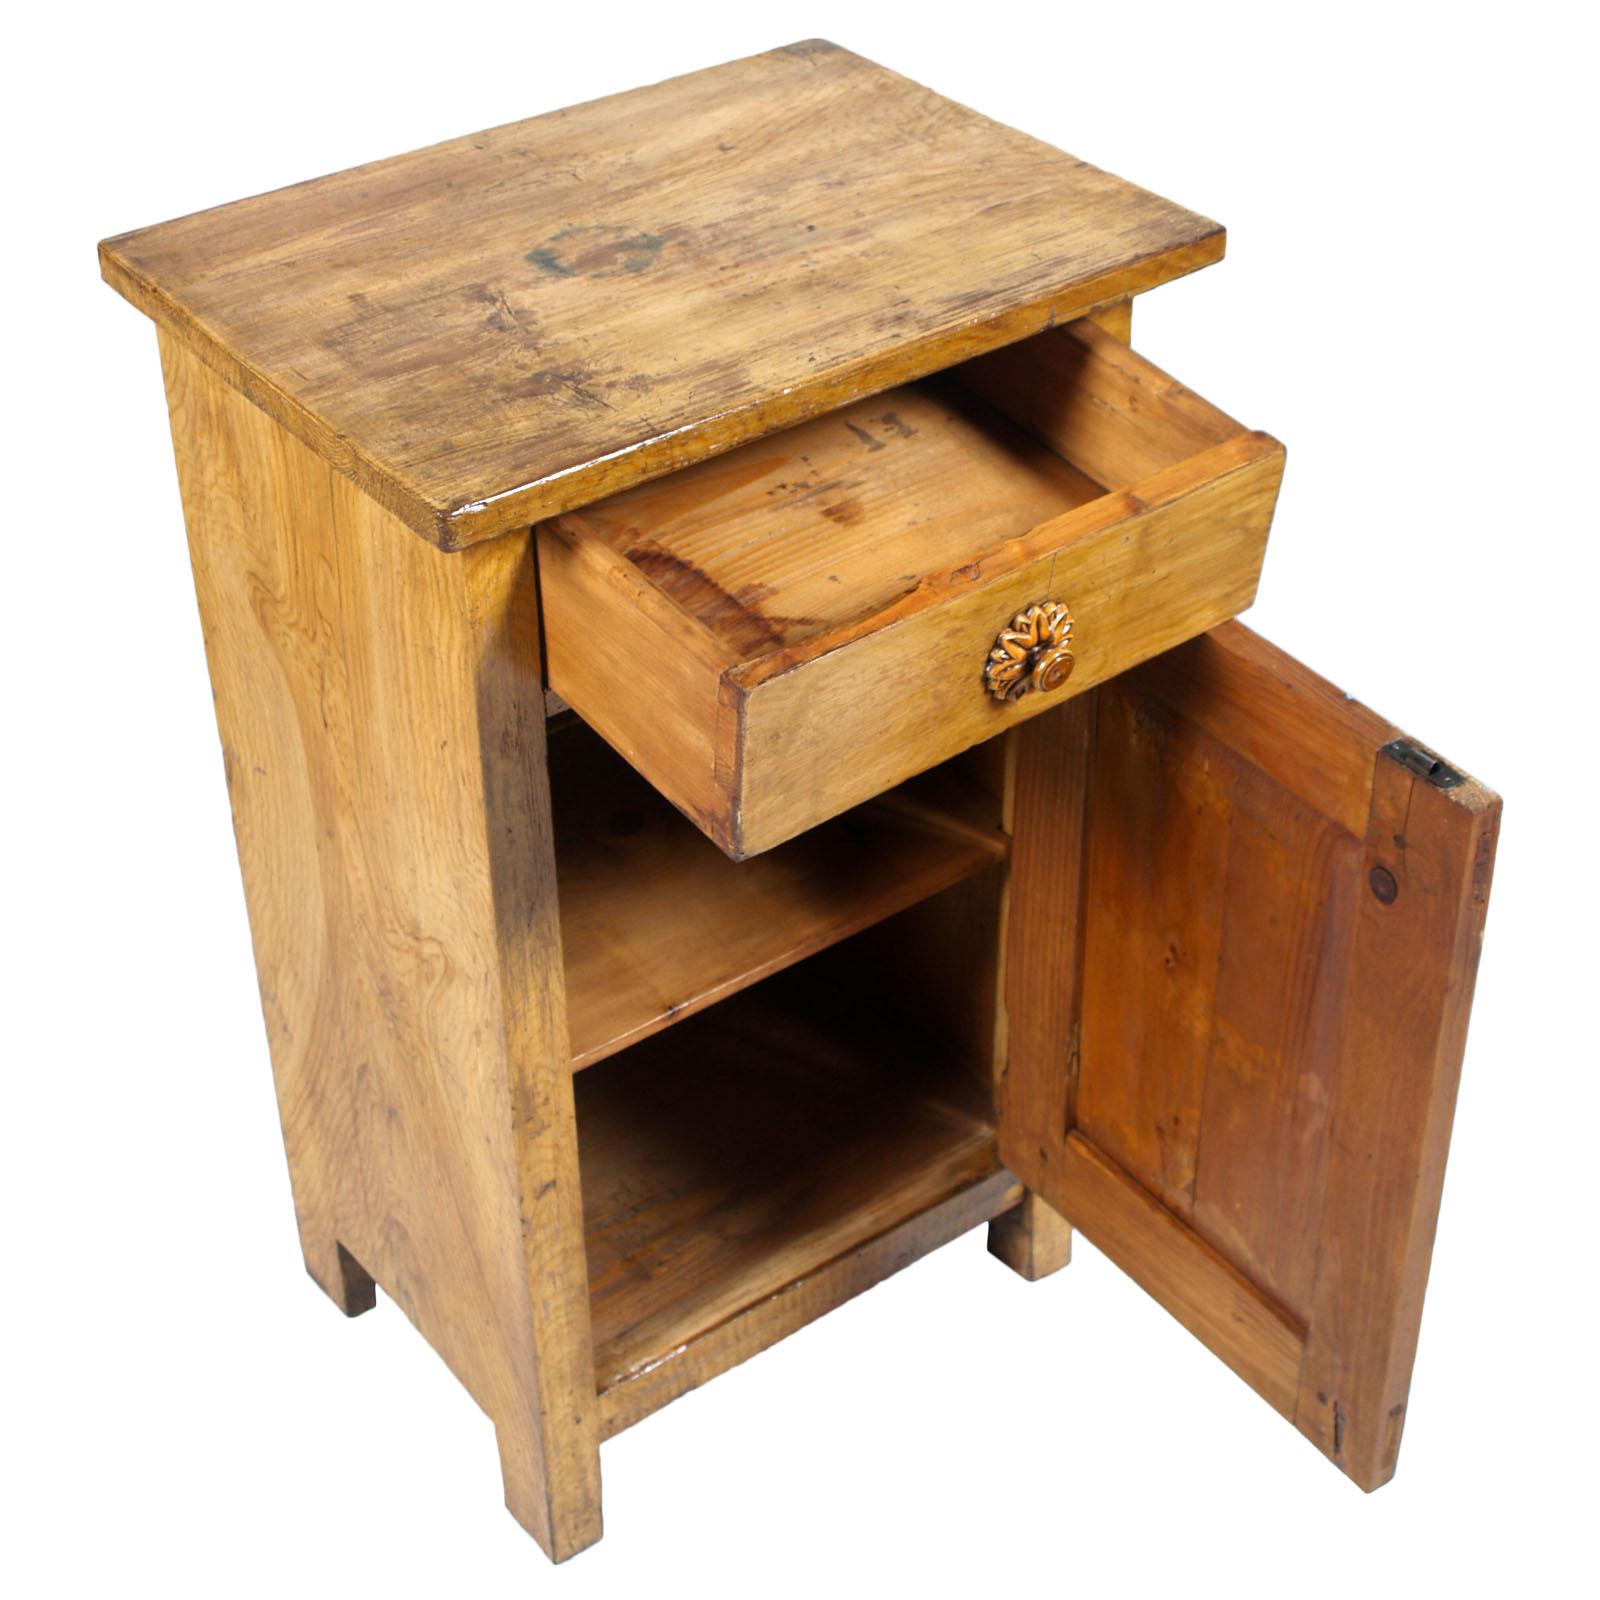 Italian early 20th century Art Nouveau country rustic nightstand cabinet restored and polished to wax, in all massive pine.

Measure cm: H 79, W 48, D 35.